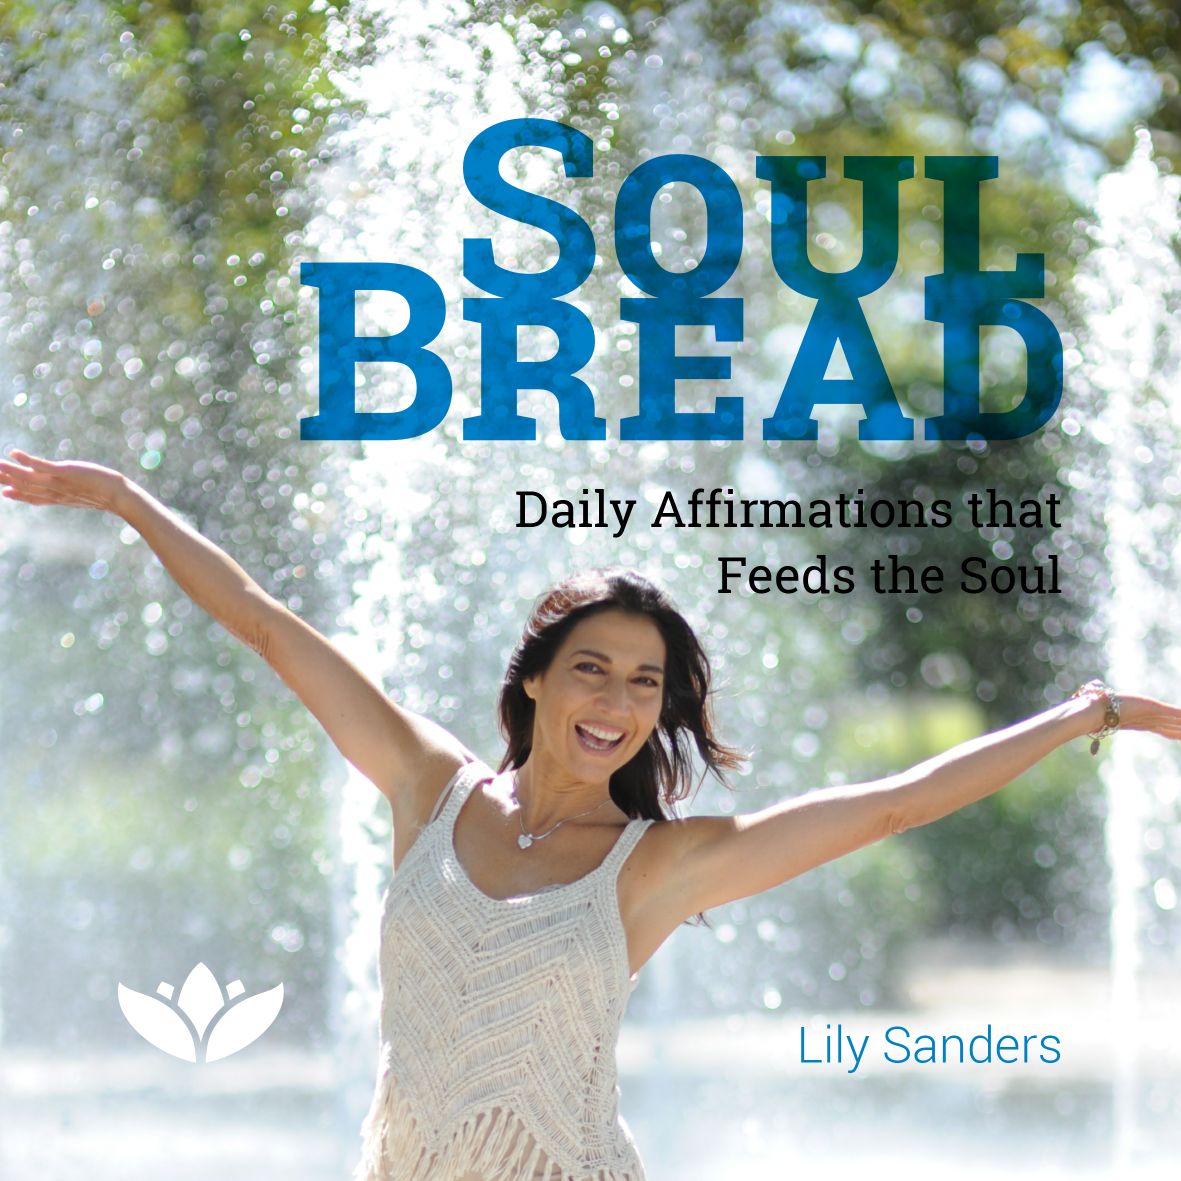 Soul Bread Daily Affirmations that Feeds the Soul Lily Sanders